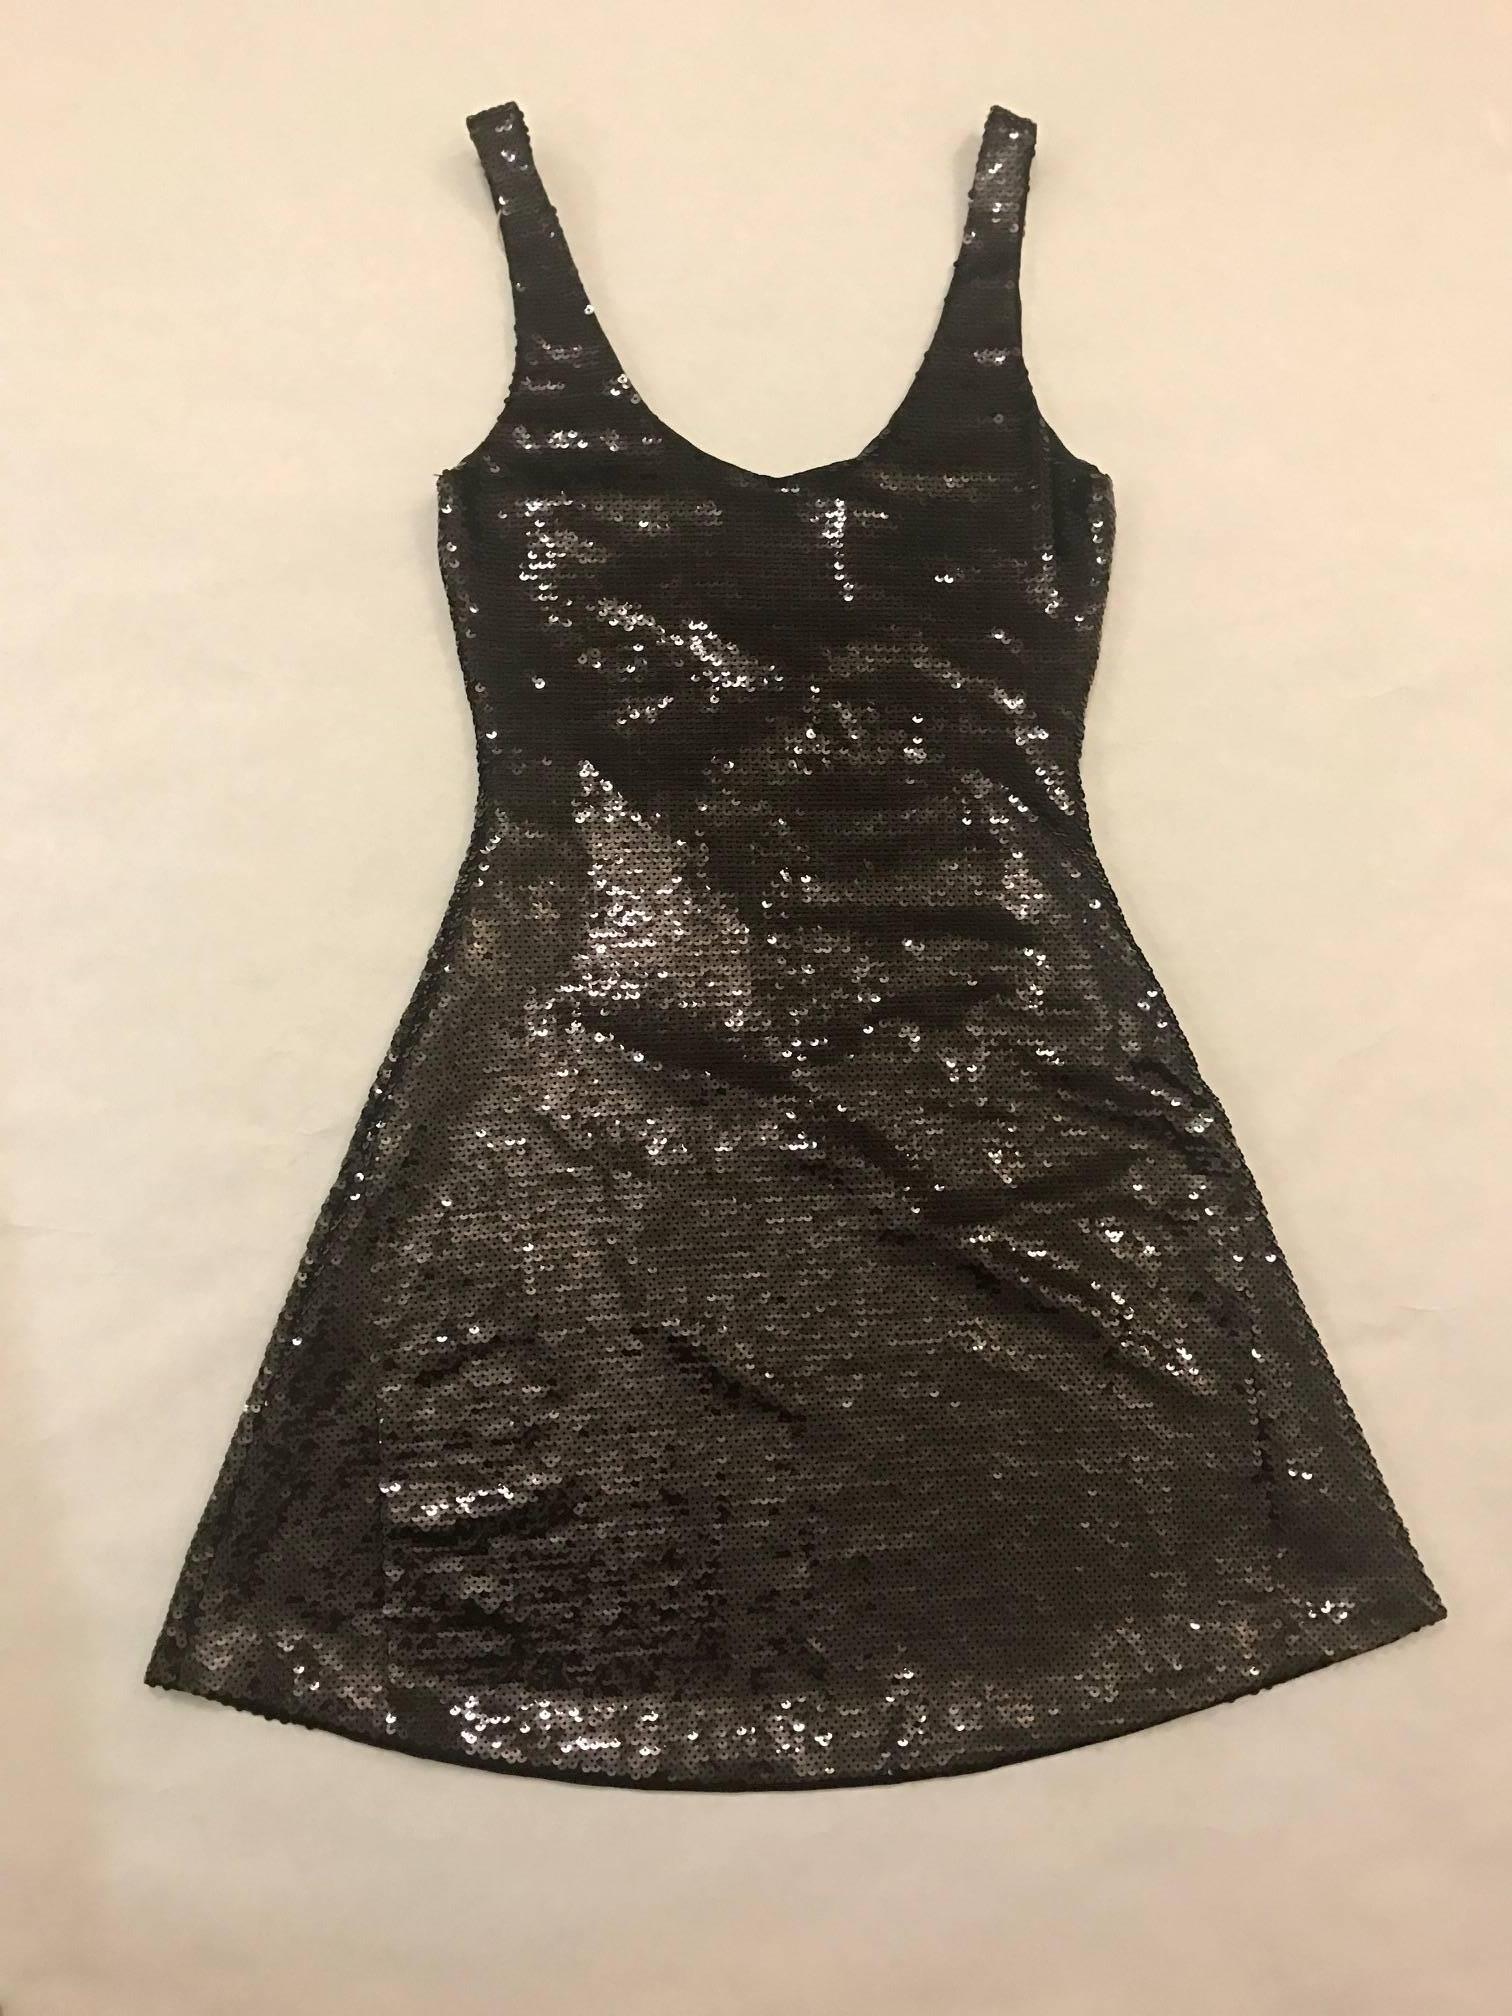 Recent Moschino Couture! by Jeremy Scott skater cut black sequined dress reads 'Little Black Dress' in white sequins at front. Sleeveless, scoop neck. No zip, pulls on.

100% polyester.
Fully lined in 98% nylon, 2% spandex.

Made in Italy.

Labeled